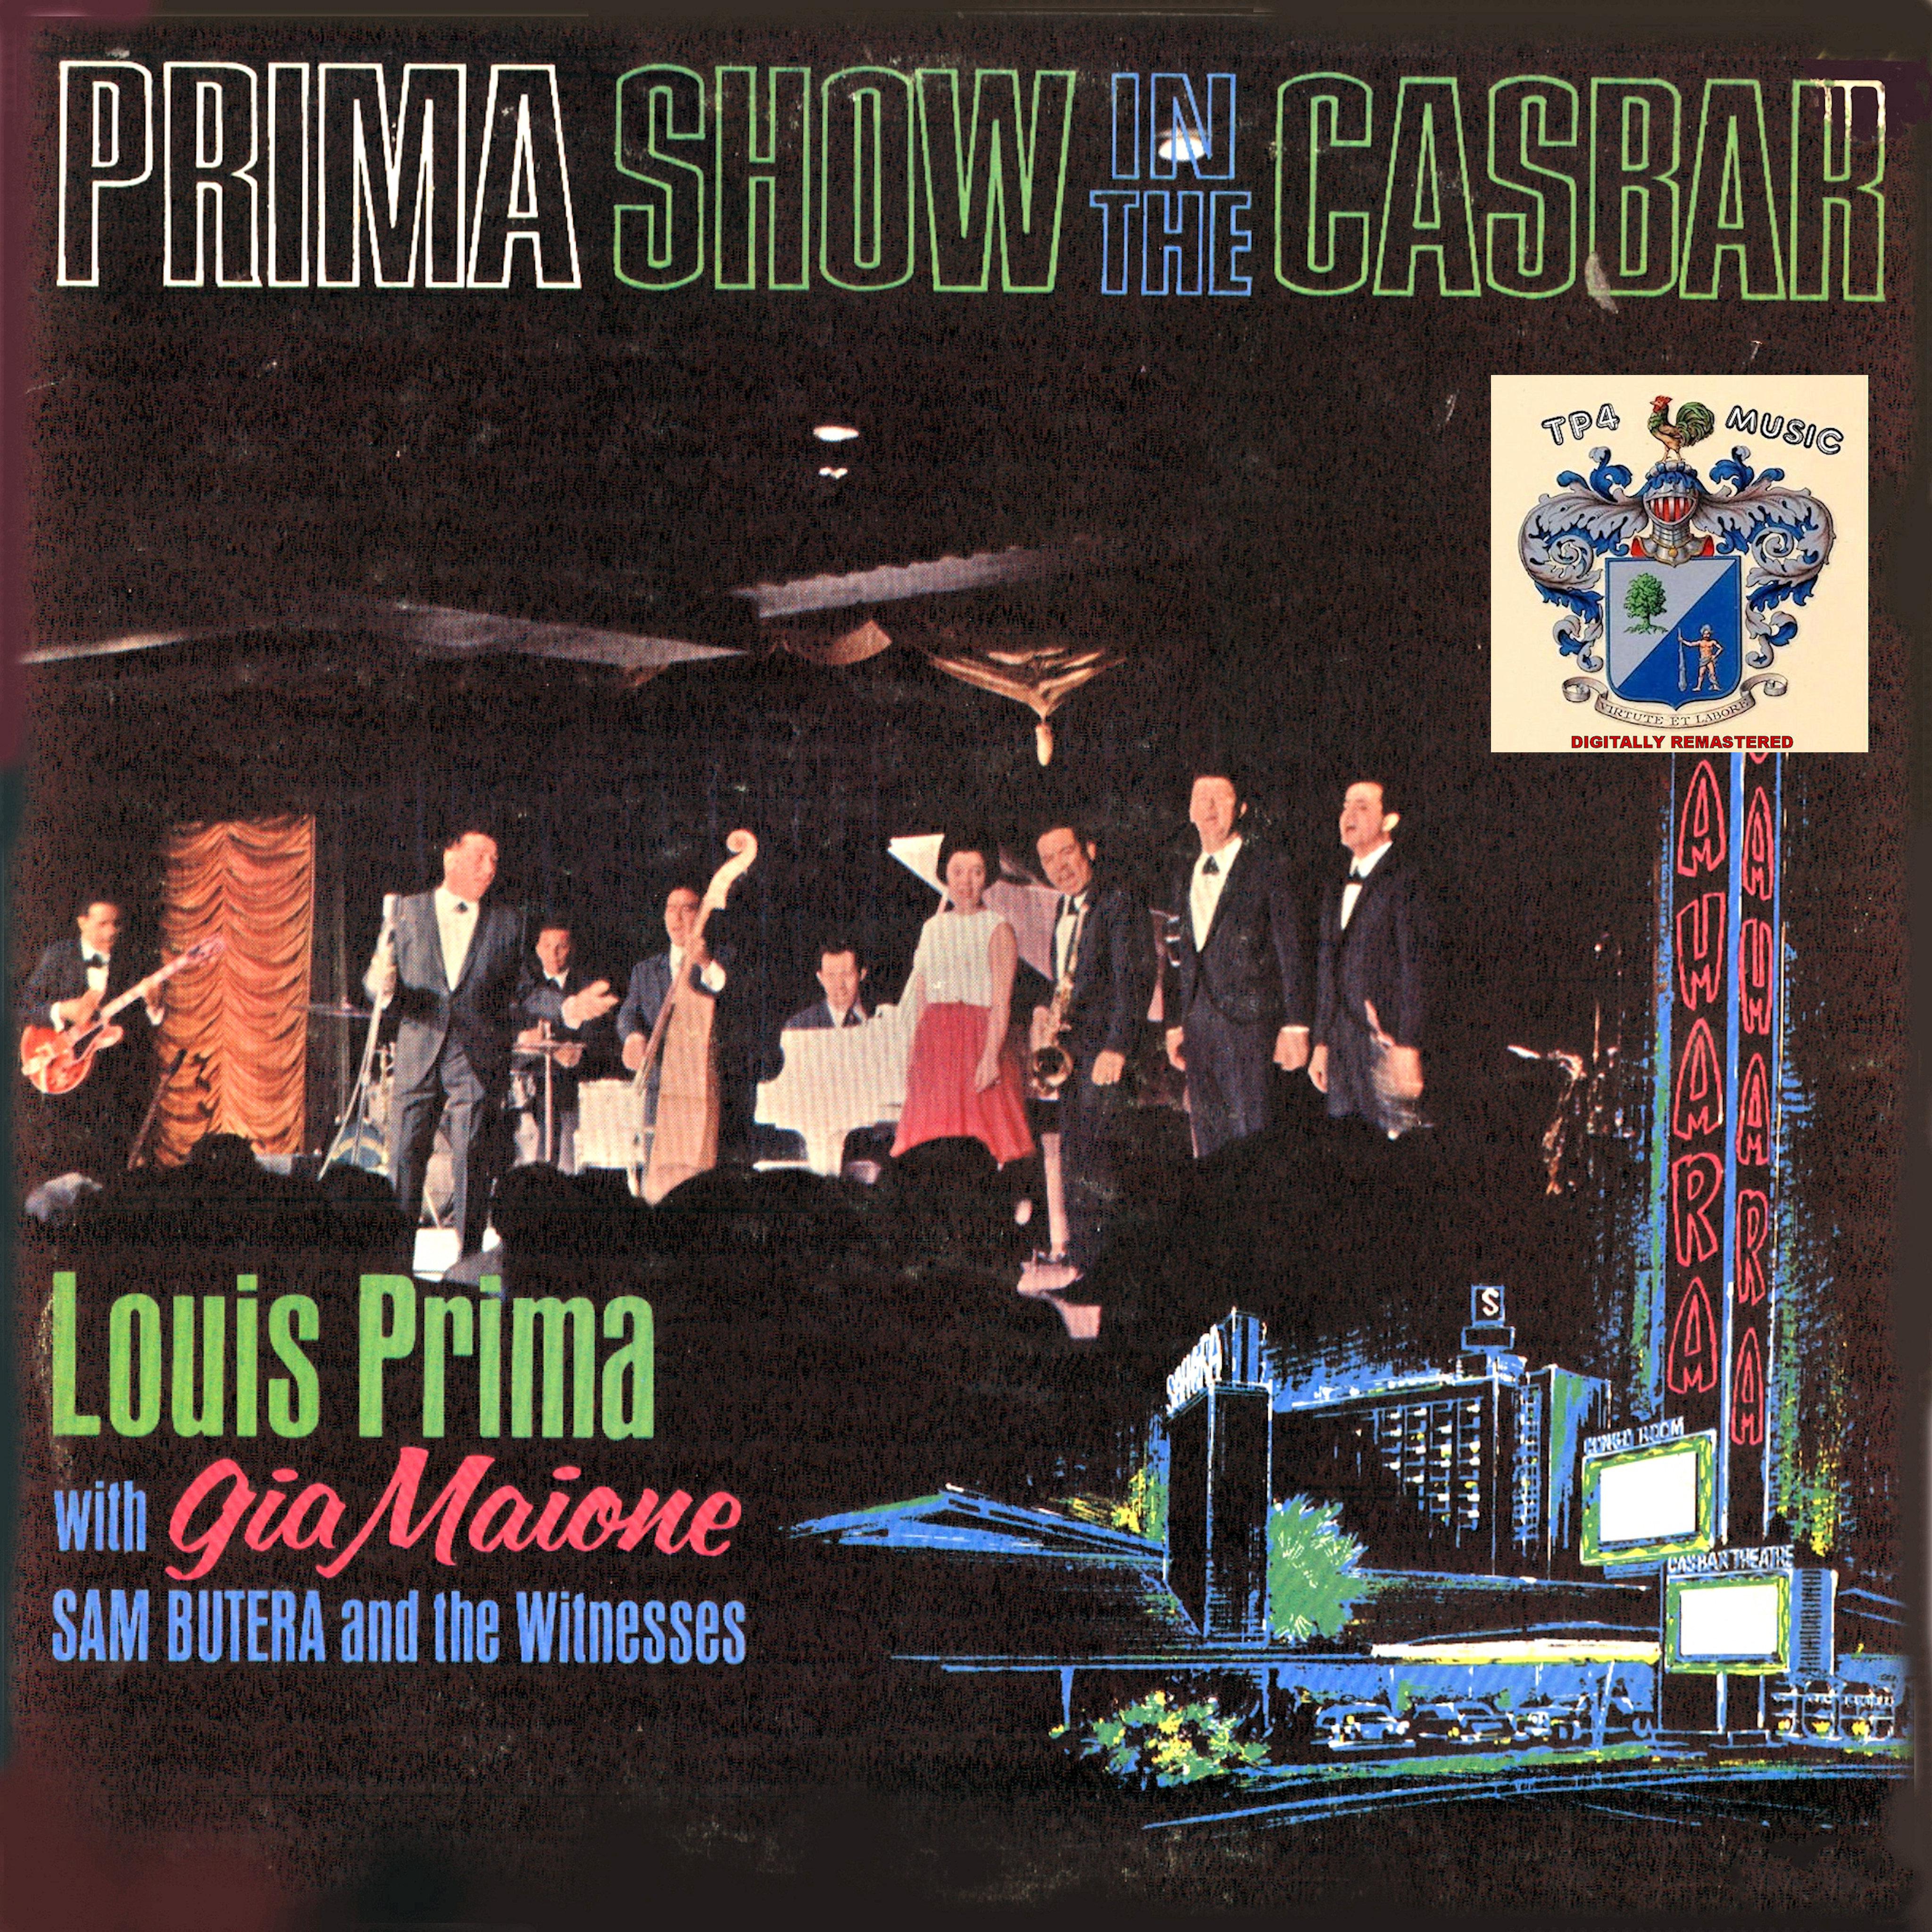 Prima Show in the Casbah